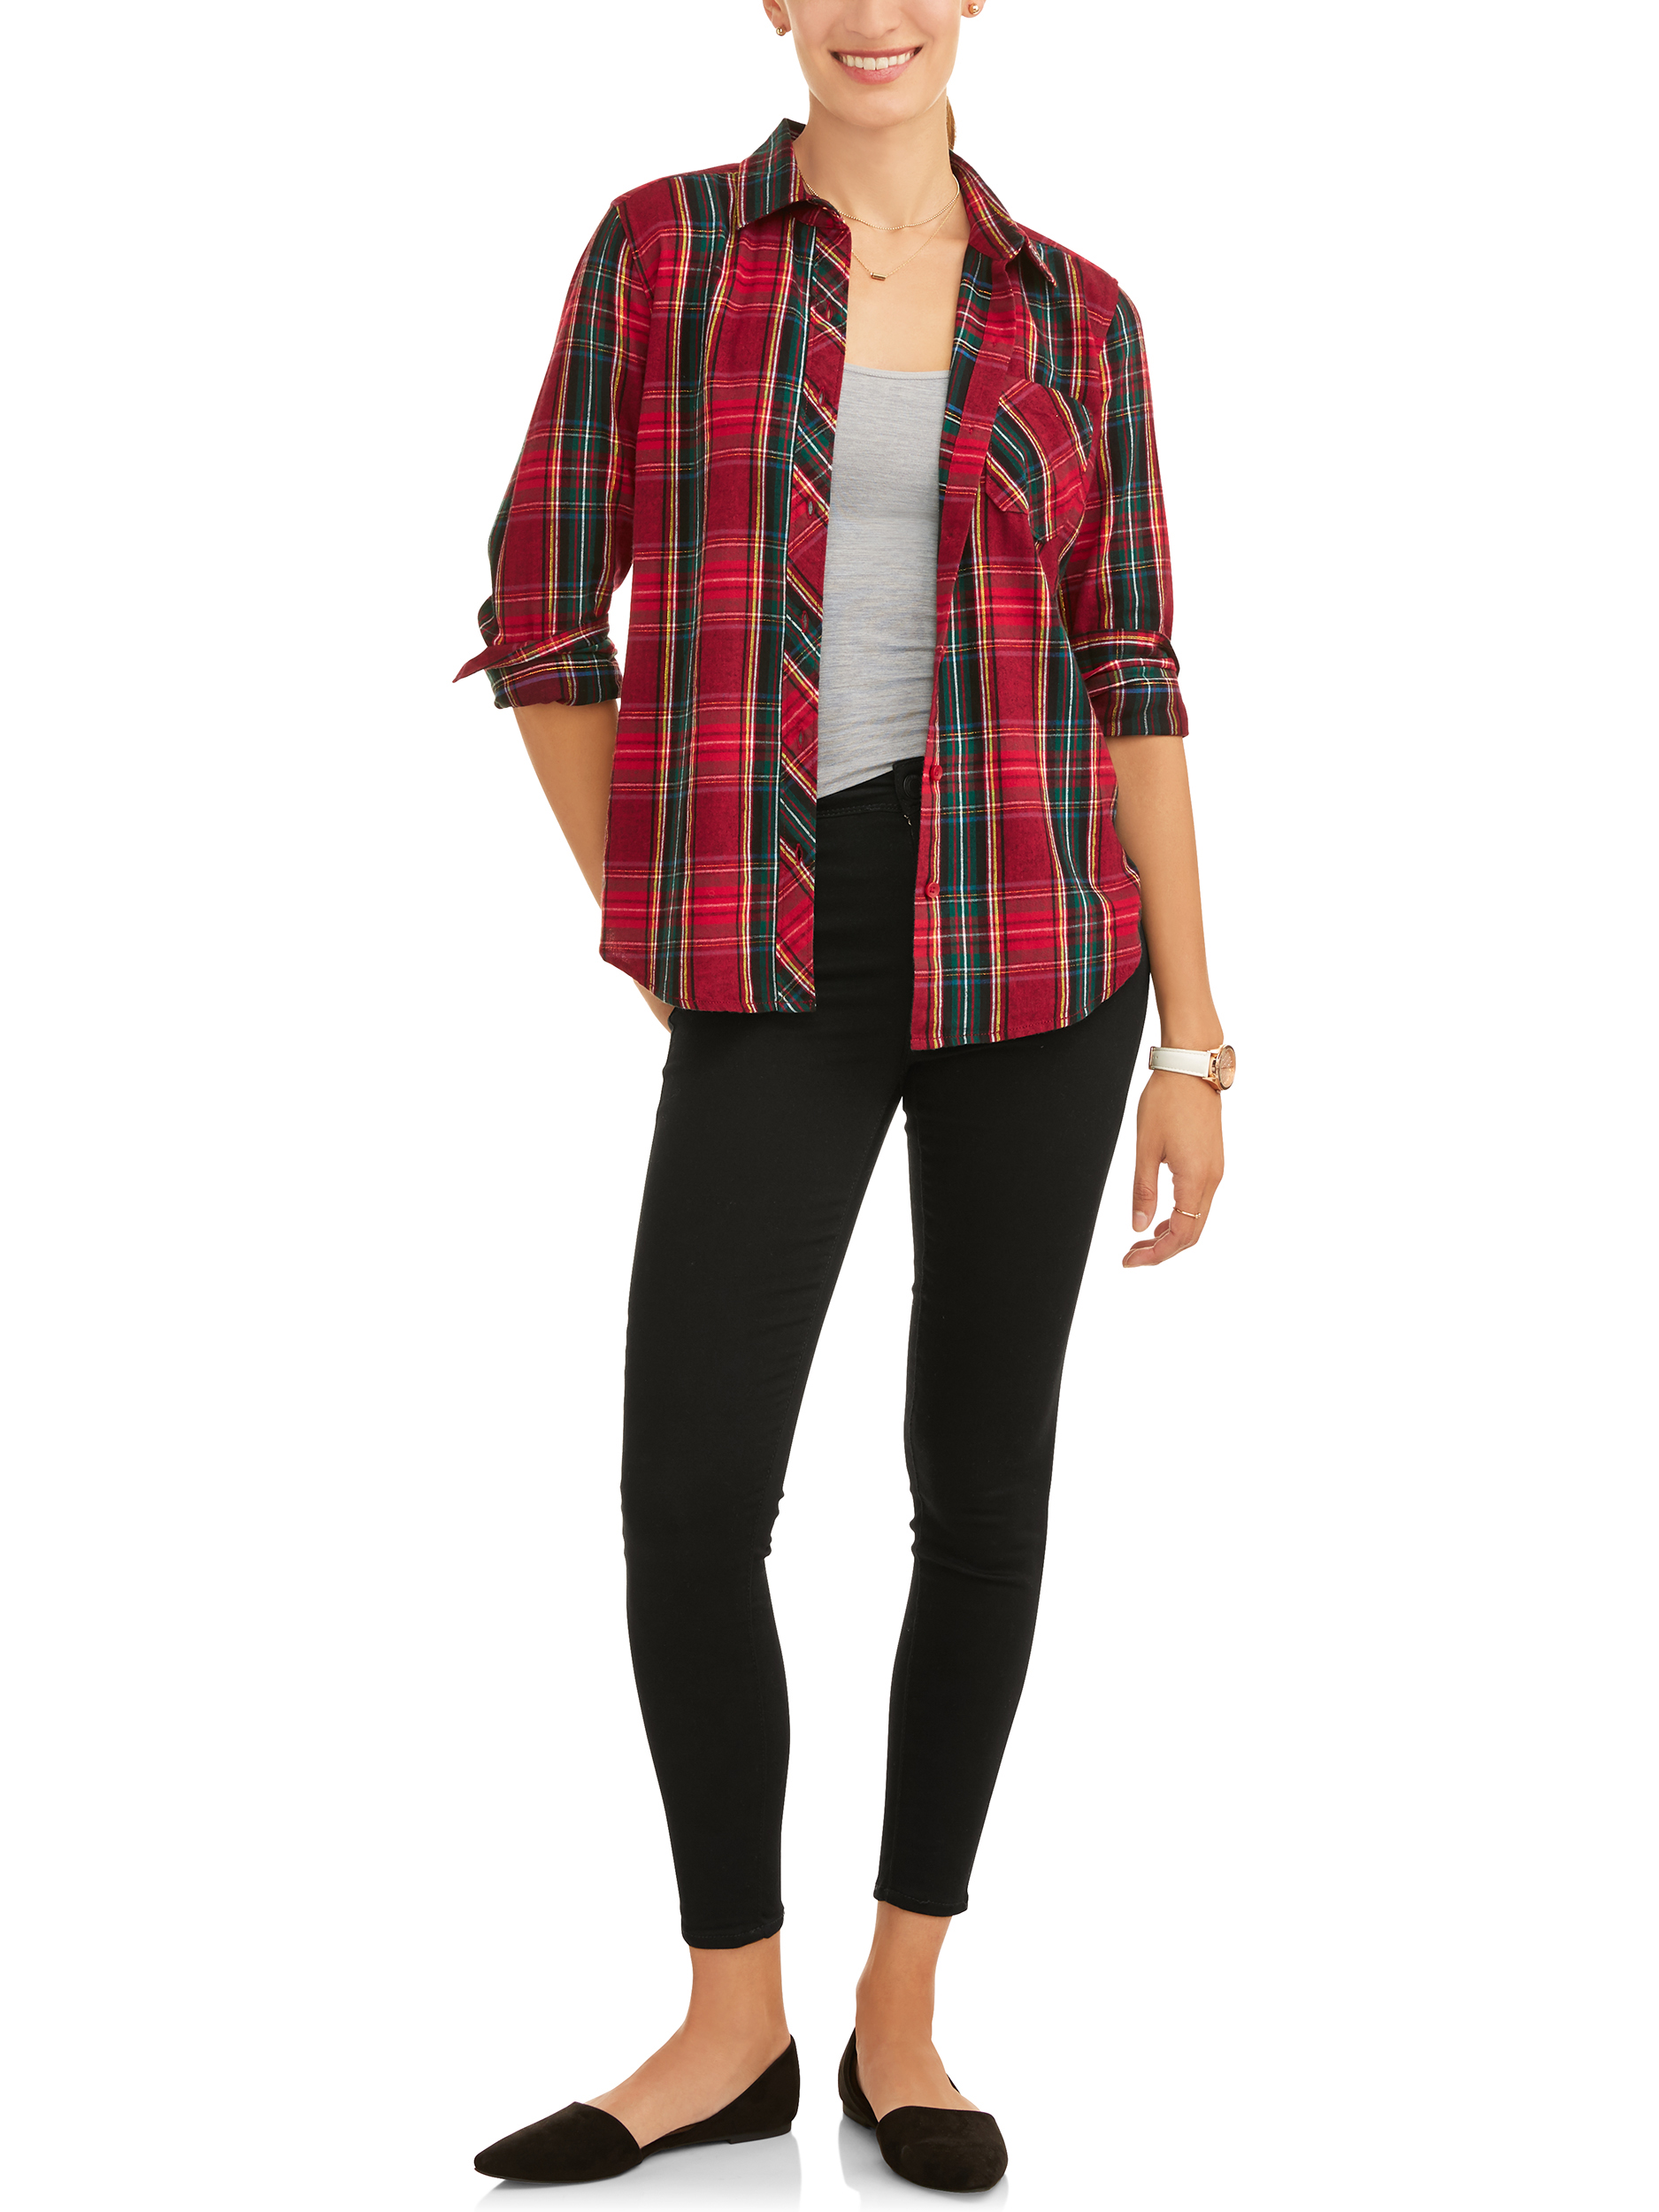 Time and Tru Women's Brushed Cotton Plaid Shirt - image 3 of 6